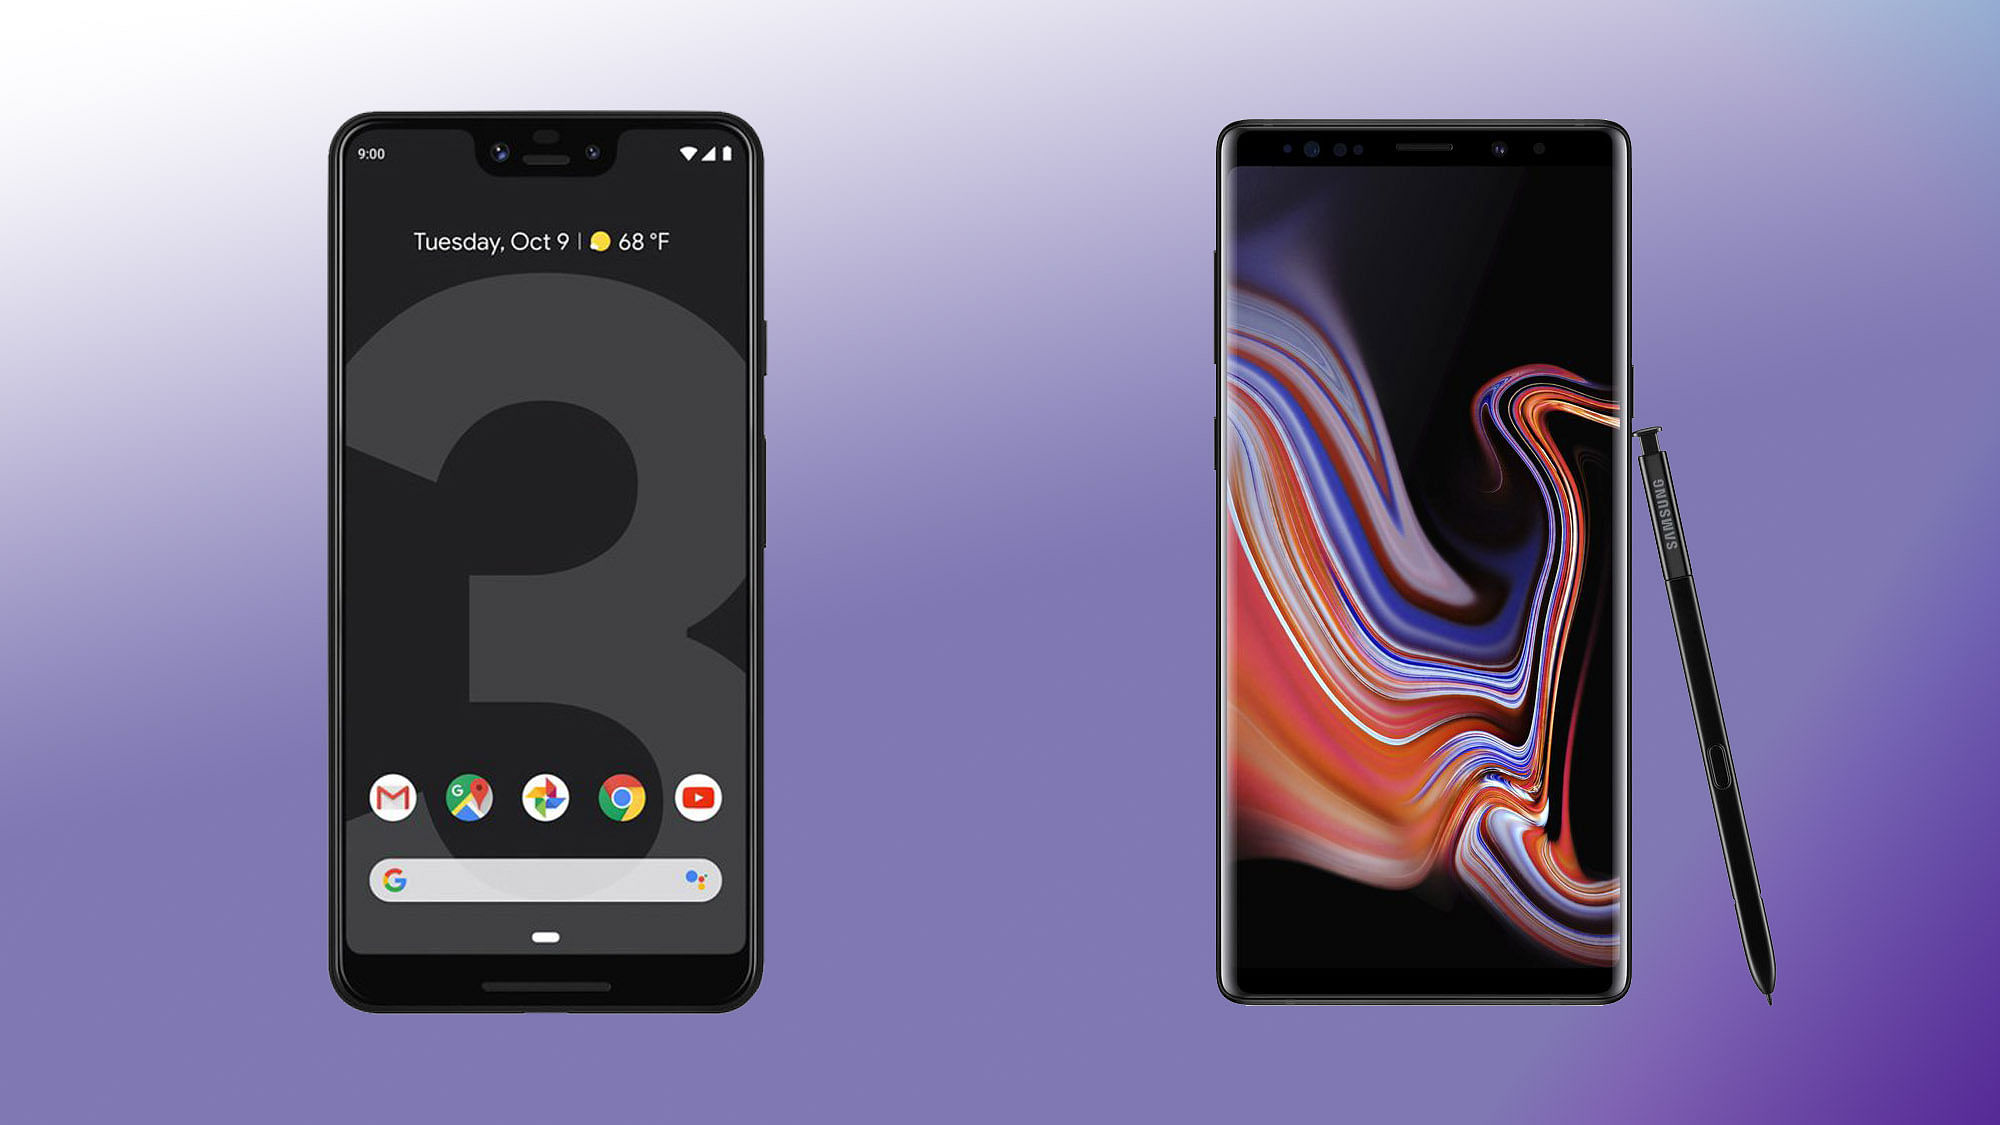 Google Pixel 3 XL (left) goes up against the Samsung Galaxy Note 9 (right)